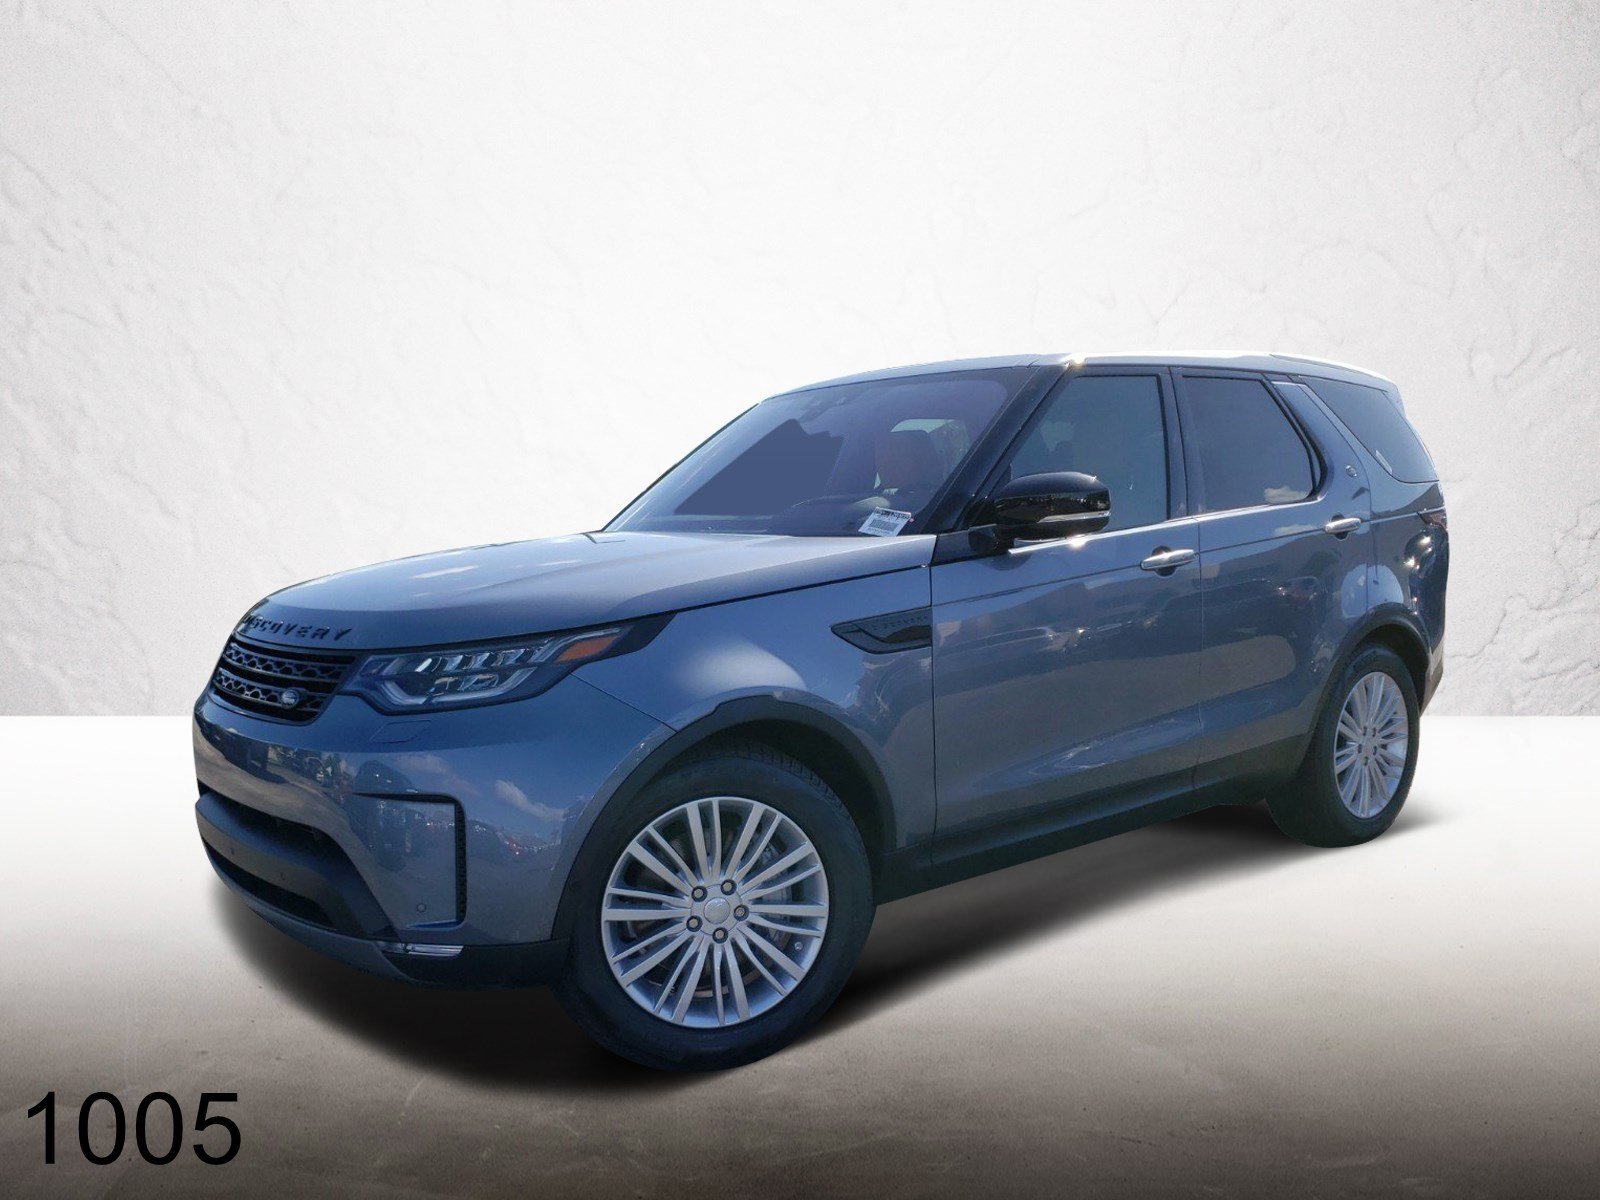 New 2020 Land Rover Discovery Hse Luxury